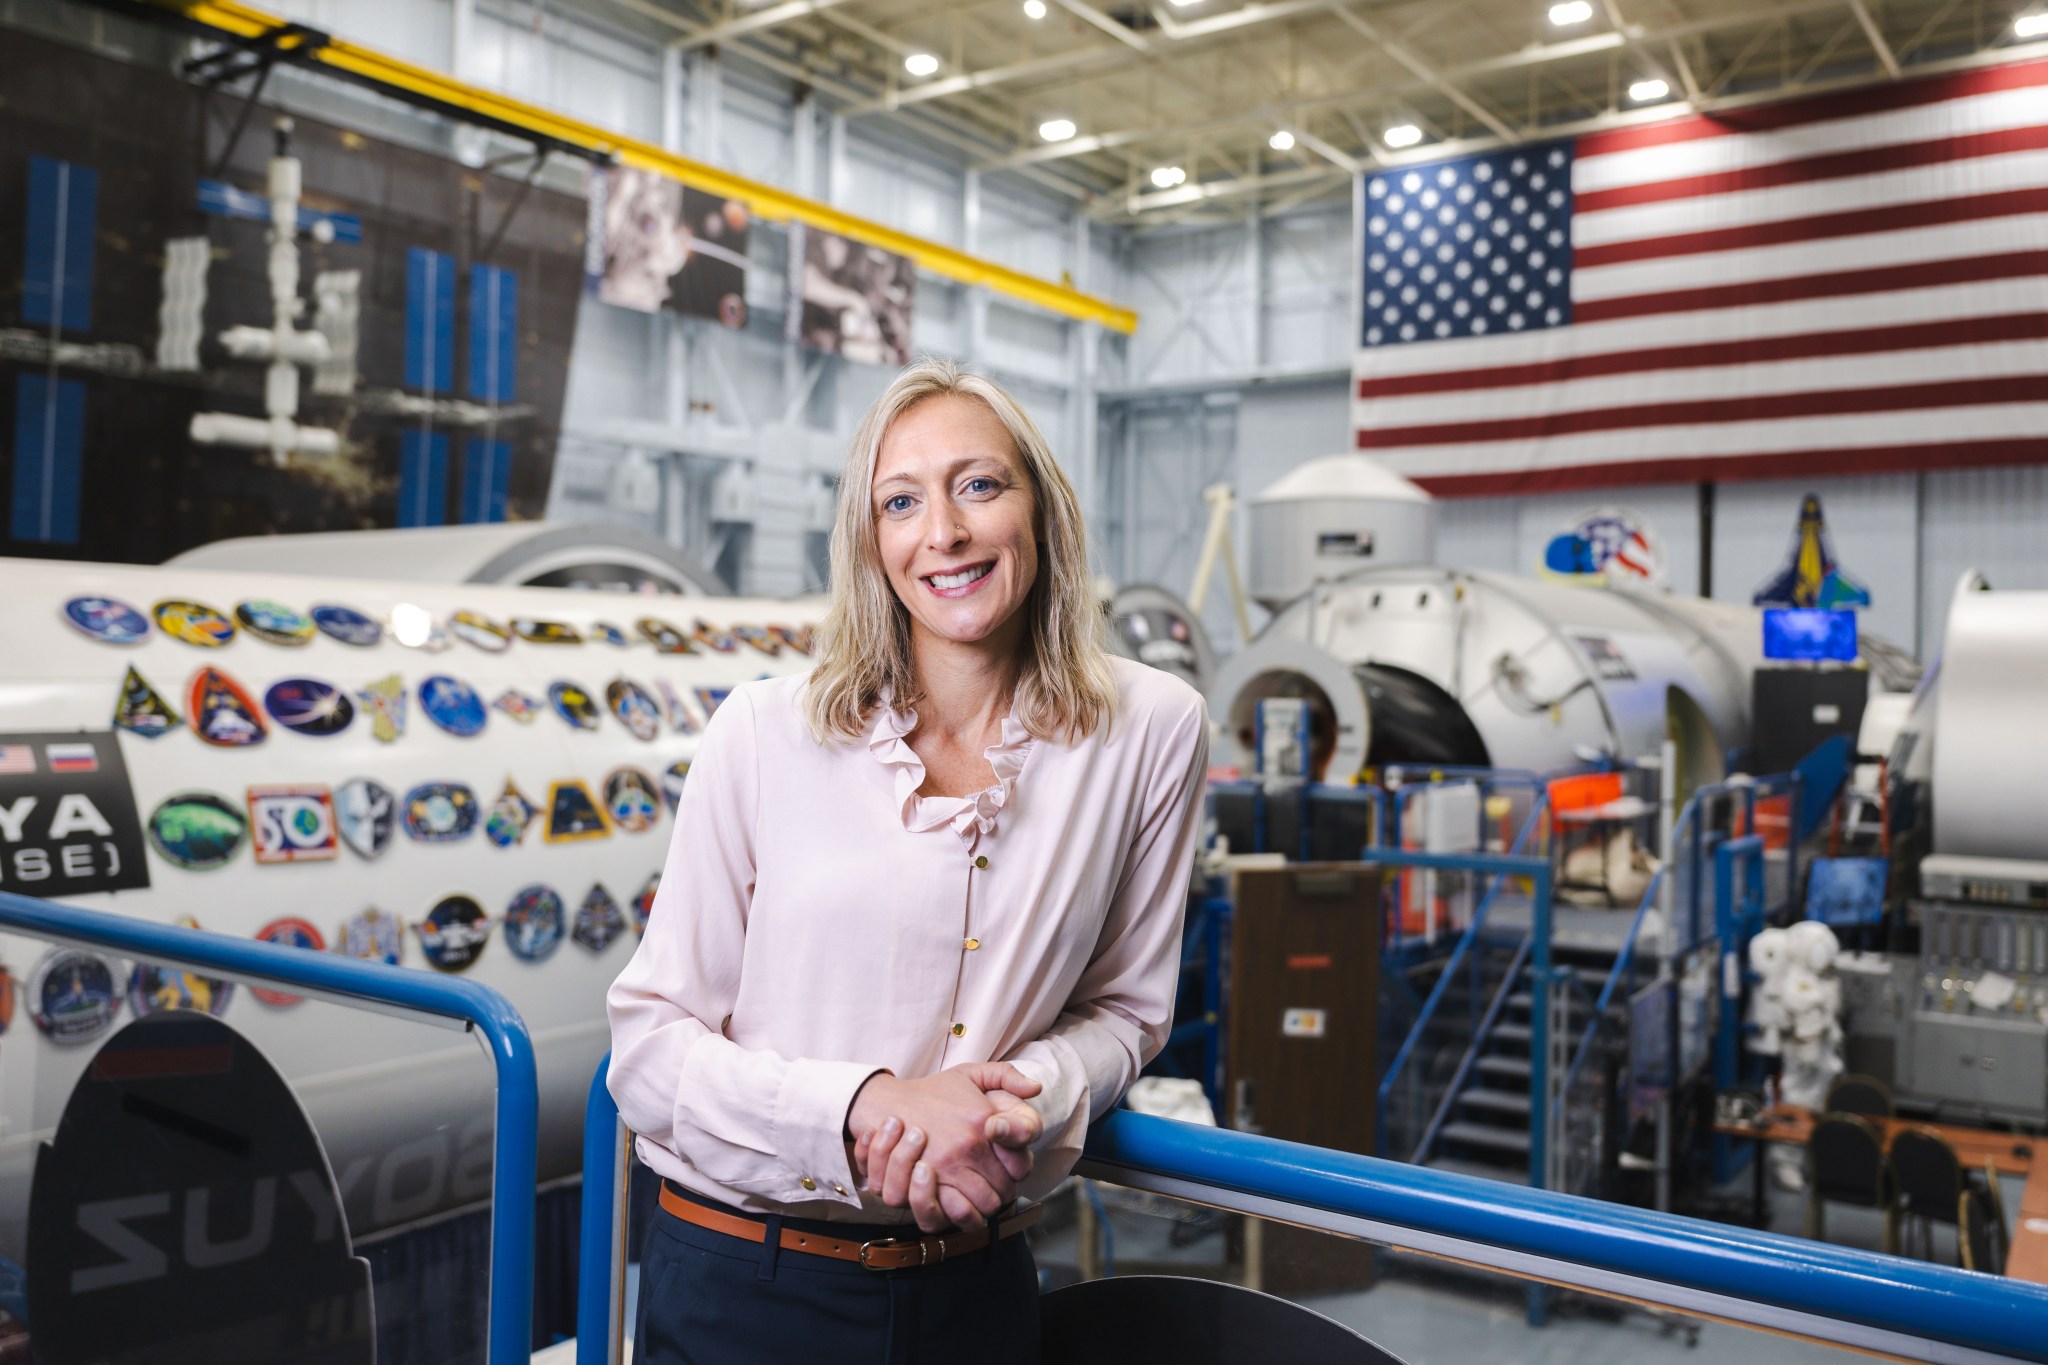 A woman with straight, shoulder-length blonde hair smiles at the camera with her hands clasped together as she leans on a blue safety railing overlooking the International Space Station modules inside the Space Vehicle Mockup Facility at NASA's Johnson Space Center. She is wearing dark dress pants, a brown belt, and a light-colored blouse with buttons and a ruffled collar. Many flight patches are visible on the white exterior of the cylindrical modules visible below her. A large American flag hangs from the ceiling in the top right of the image, with the patches of STS-51-L and STS-107 on the wall beneath it.